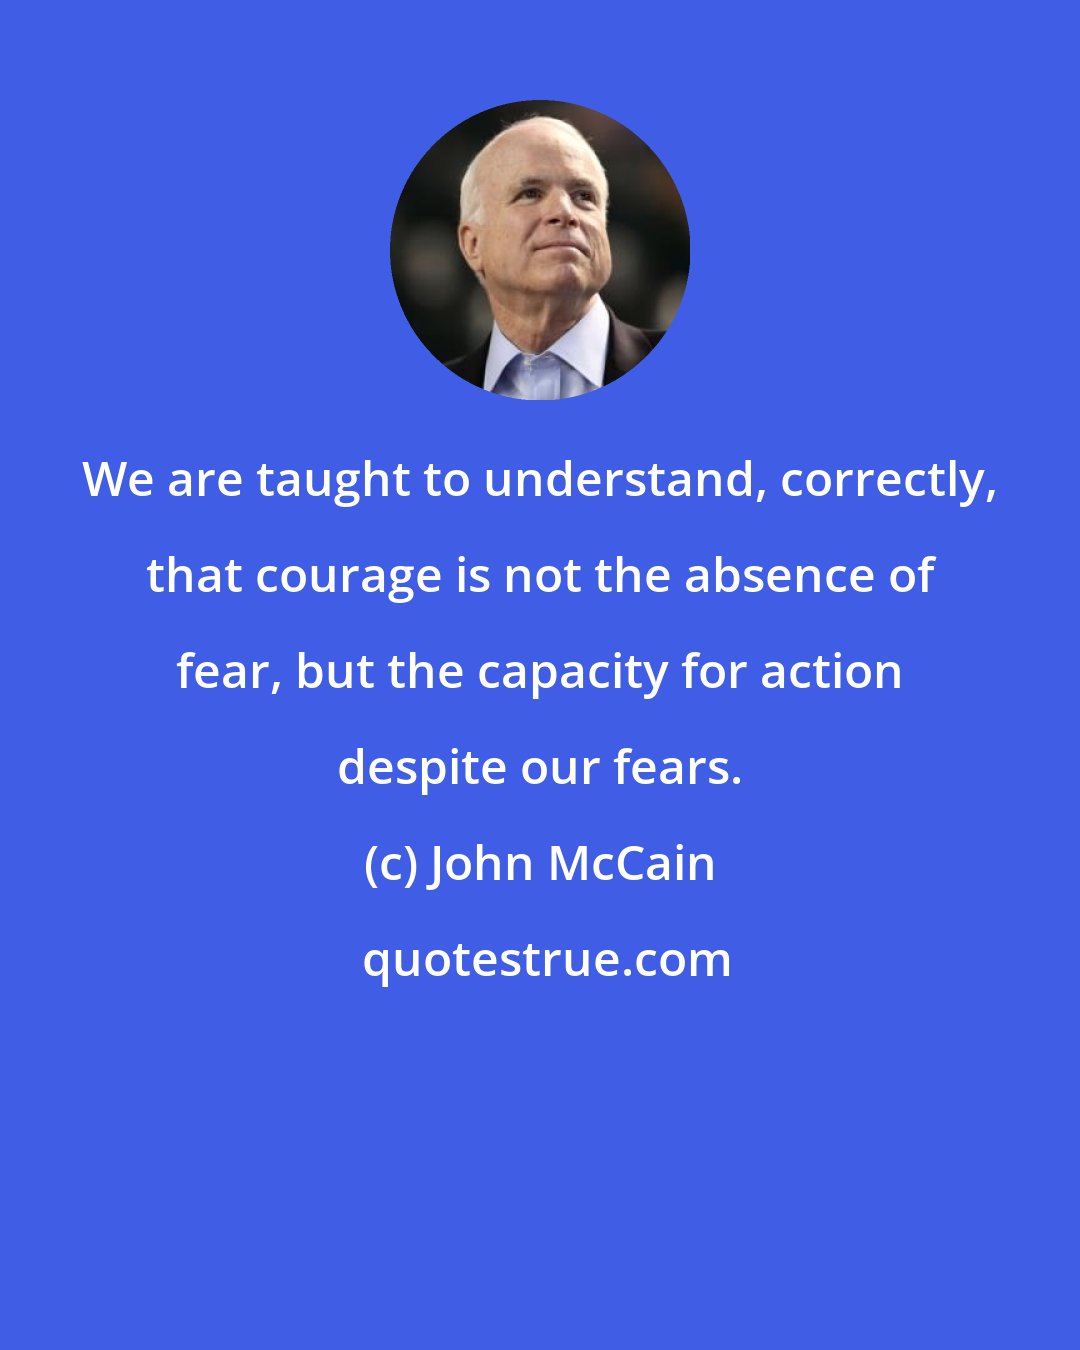 John McCain: We are taught to understand, correctly, that courage is not the absence of fear, but the capacity for action despite our fears.